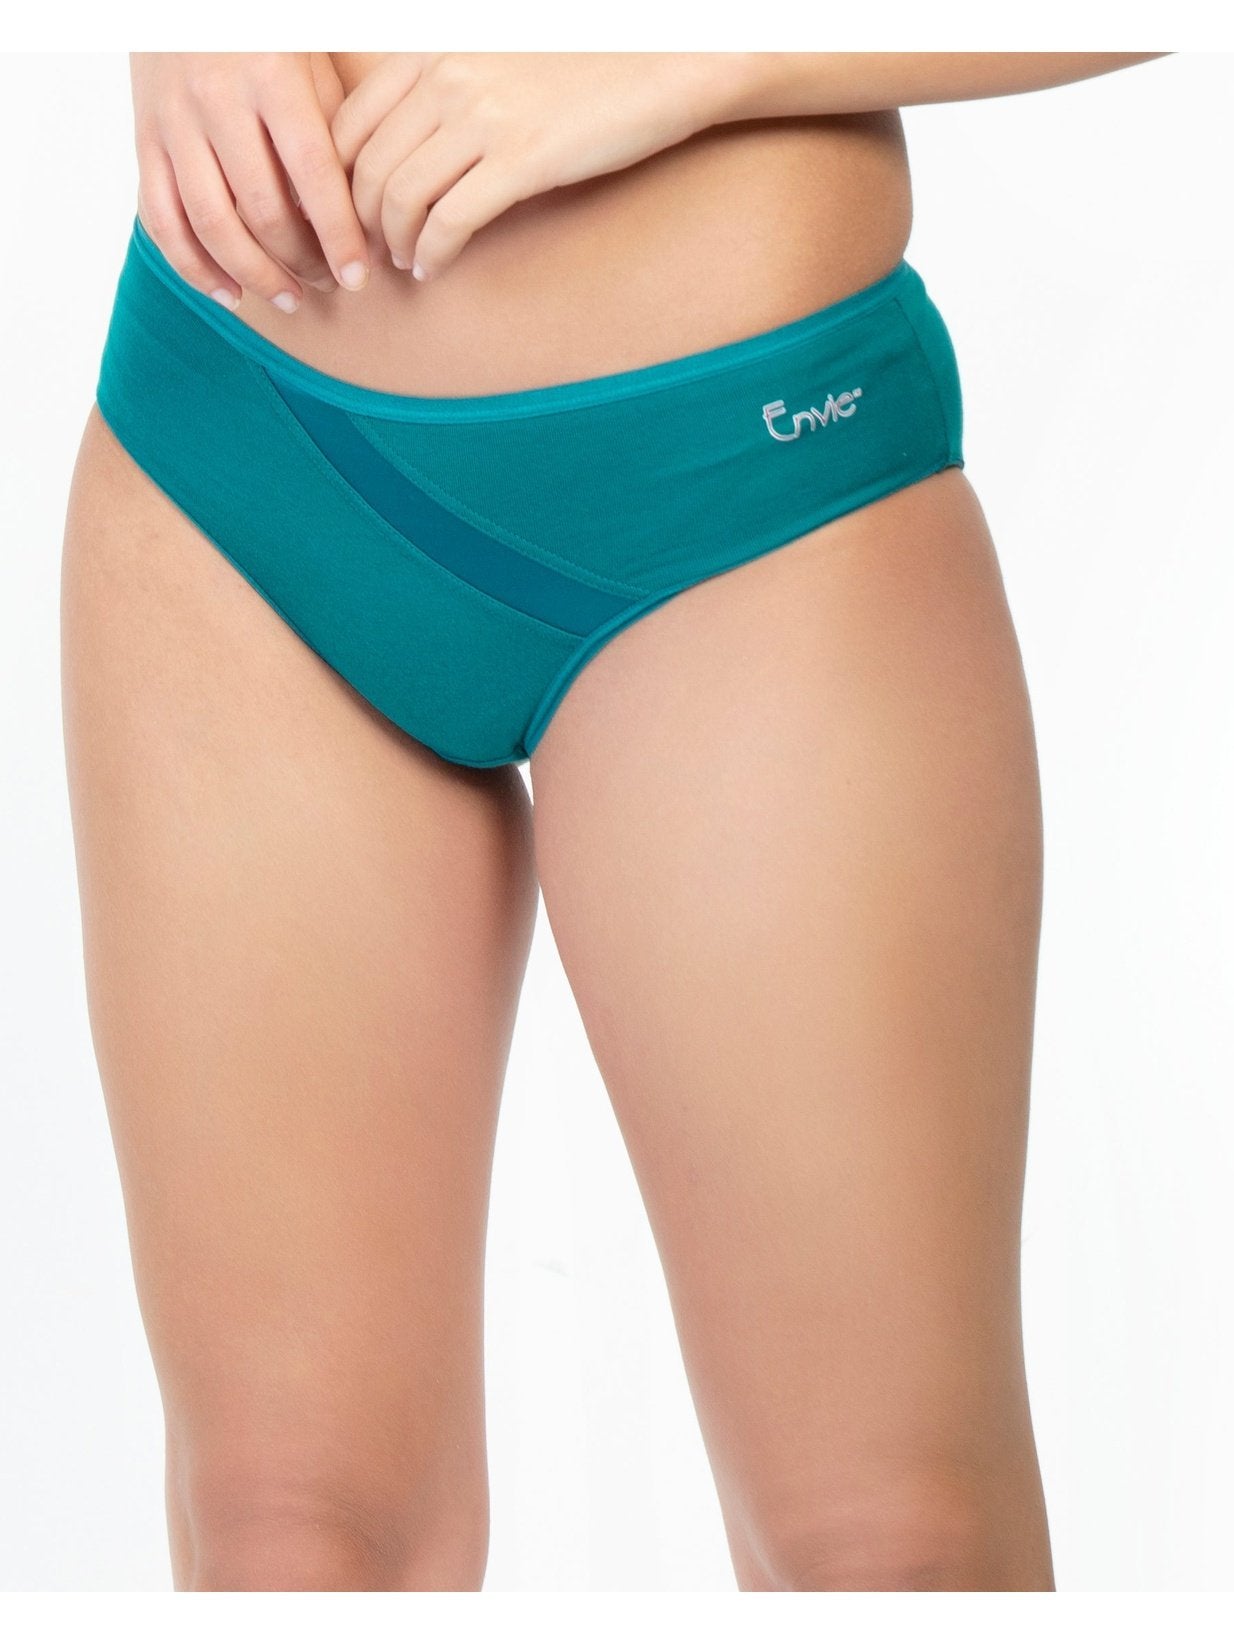 Envie Women's Cotton Brief Low rise Girls Underwear panty – Saanvi  Clothing Private Limited